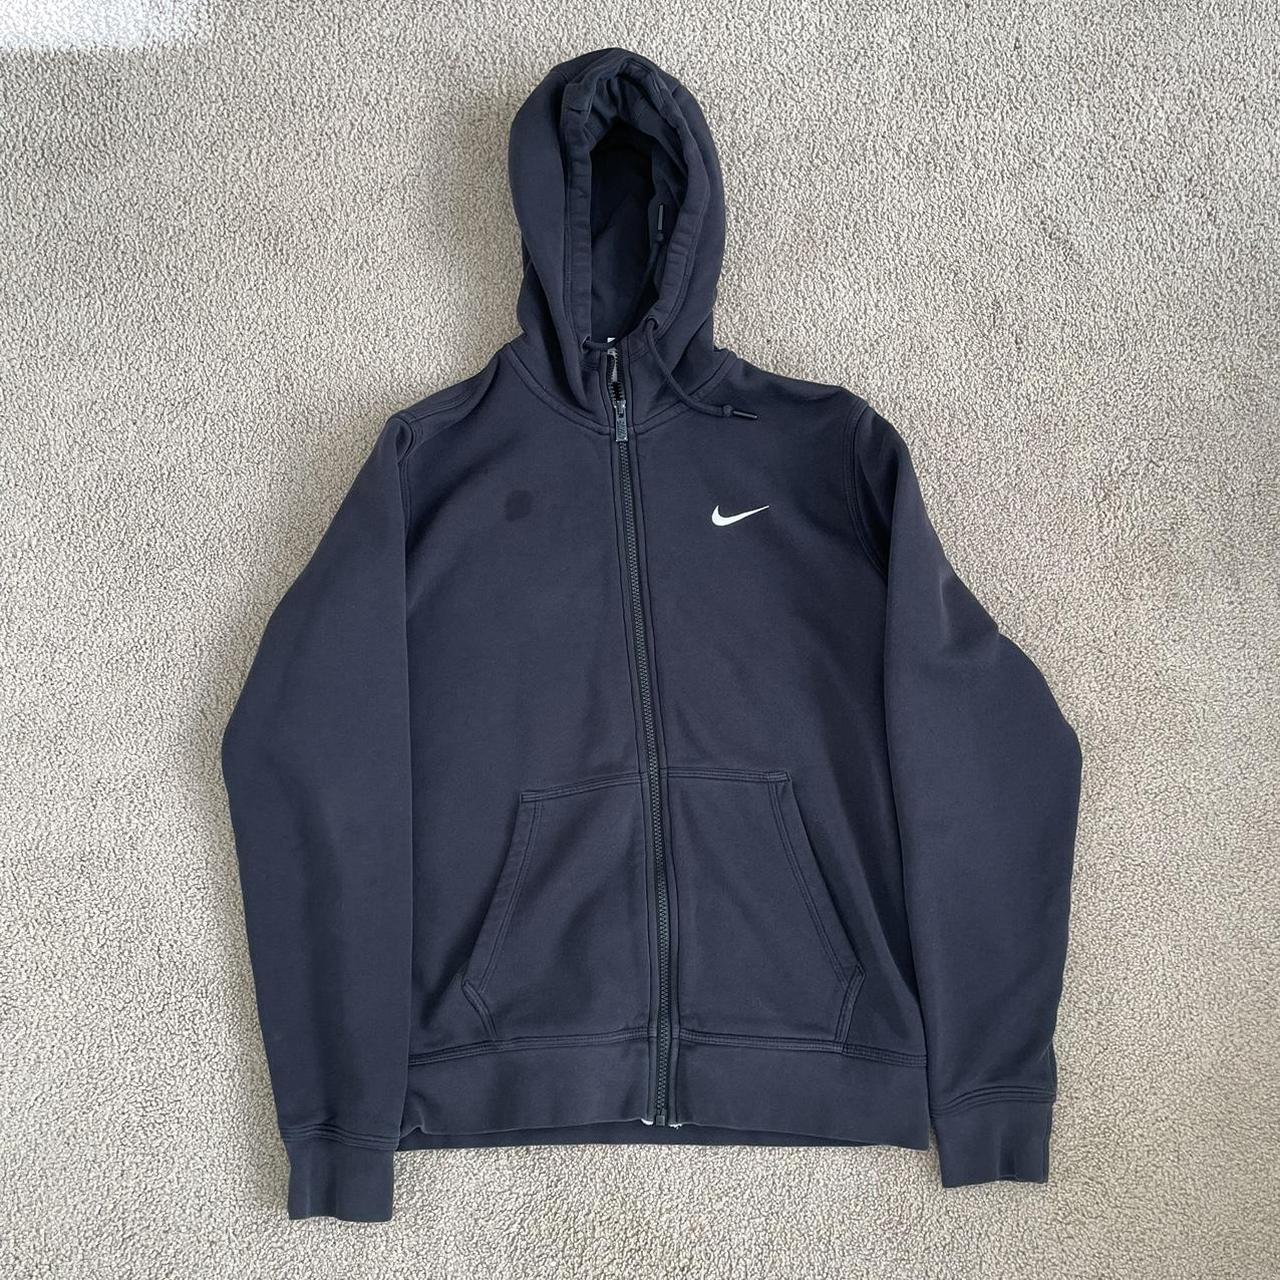 Black nike zip up stain on the top right - Depop